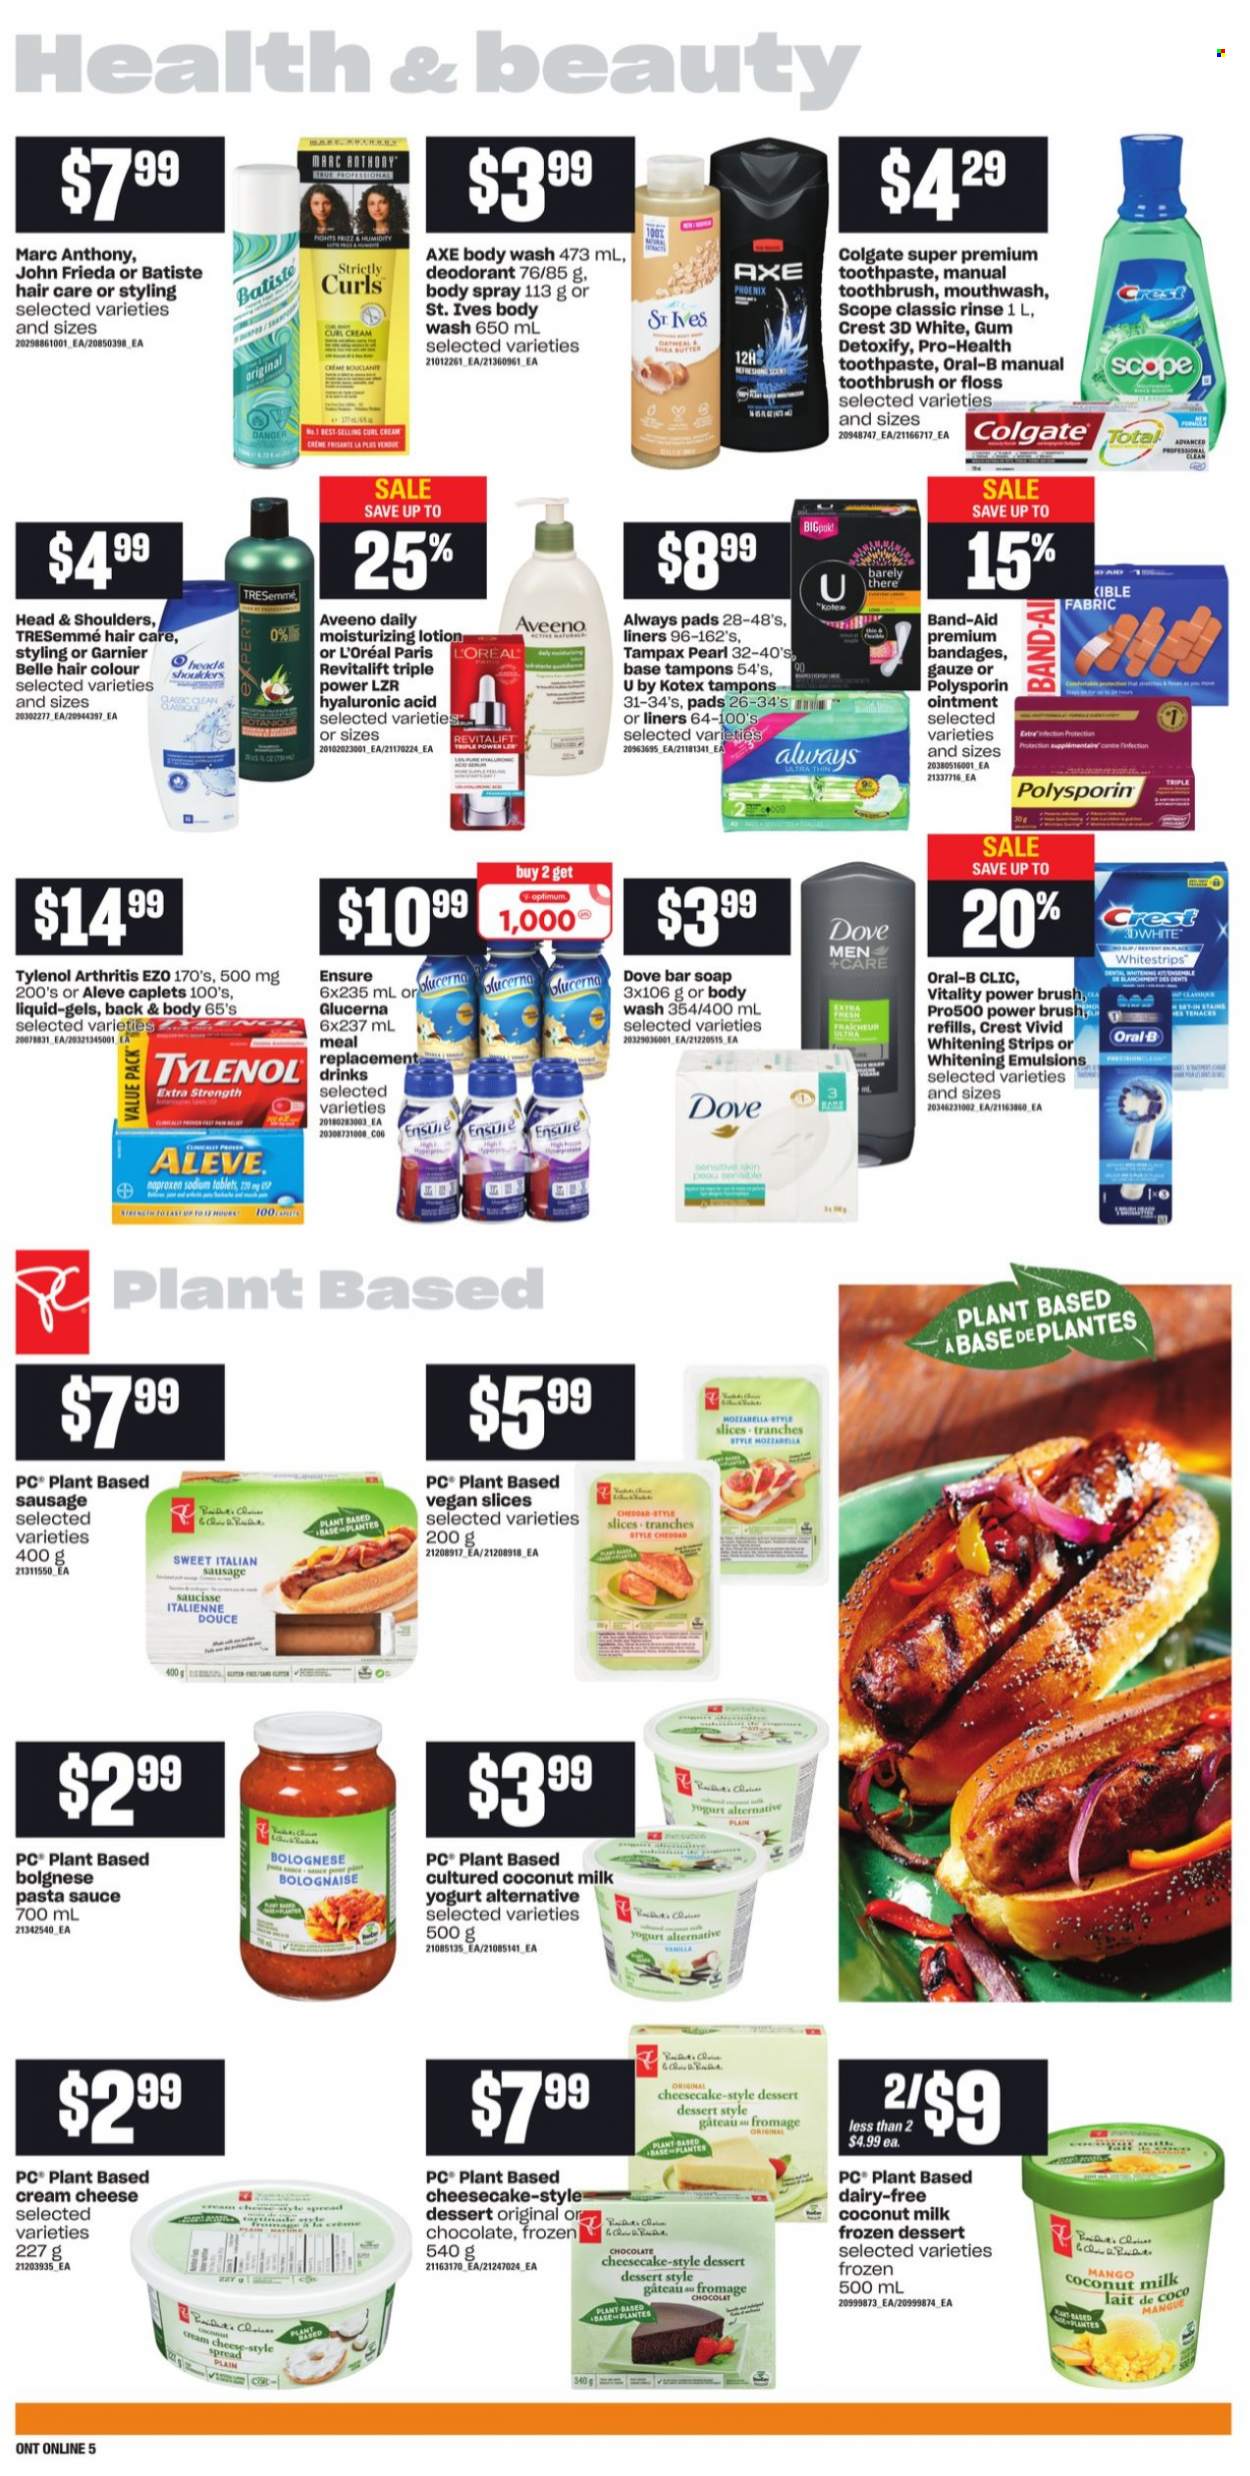 thumbnail - Loblaws Flyer - October 21, 2021 - October 27, 2021 - Sales products - cheesecake, mango, pasta sauce, sauce, sausage, italian sausage, cream cheese, cheddar, cheese, yoghurt, strips, chocolate, coconut milk, Aveeno, ointment, body wash, soap bar, soap, toothbrush, toothpaste, mouthwash, Crest, Always pads, Kotex, tampons, L’Oréal, TRESemmé, hair color, John Frieda, body lotion, body spray, anti-perspirant, Optimum, Aleve, Tylenol, Glucerna, band-aid, Dove, Colgate, Garnier, mozzarella, Tampax, Head & Shoulders, Oral-B, deodorant. Page 9.